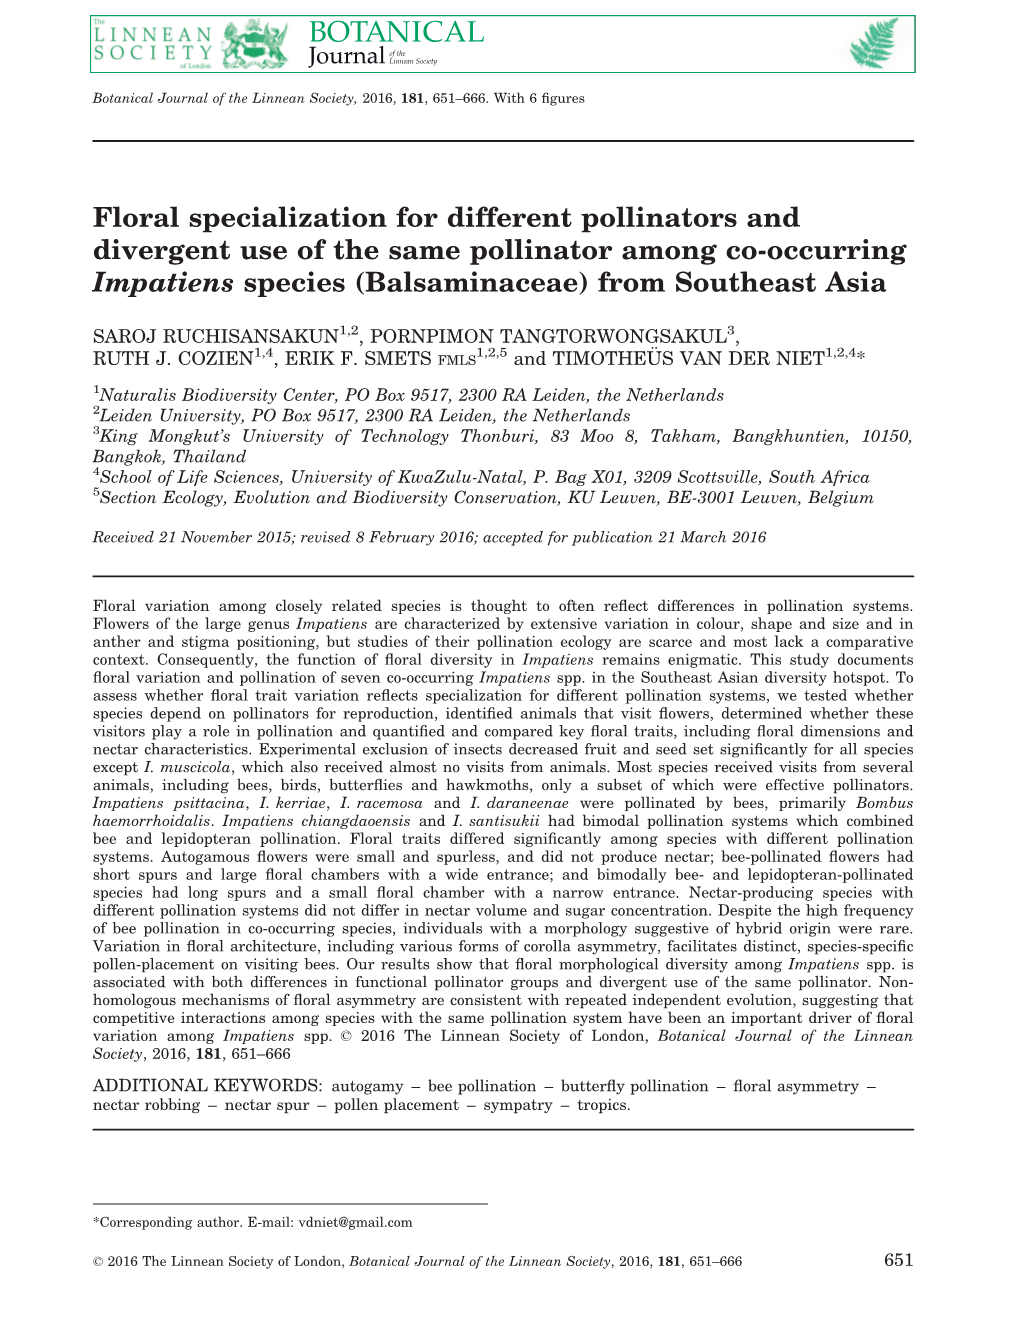 Floral Specialization for Different Pollinators and Divergent Use of the Same Pollinator Among Co-Occurring Impatiens Species (Balsaminaceae) from Southeast Asia